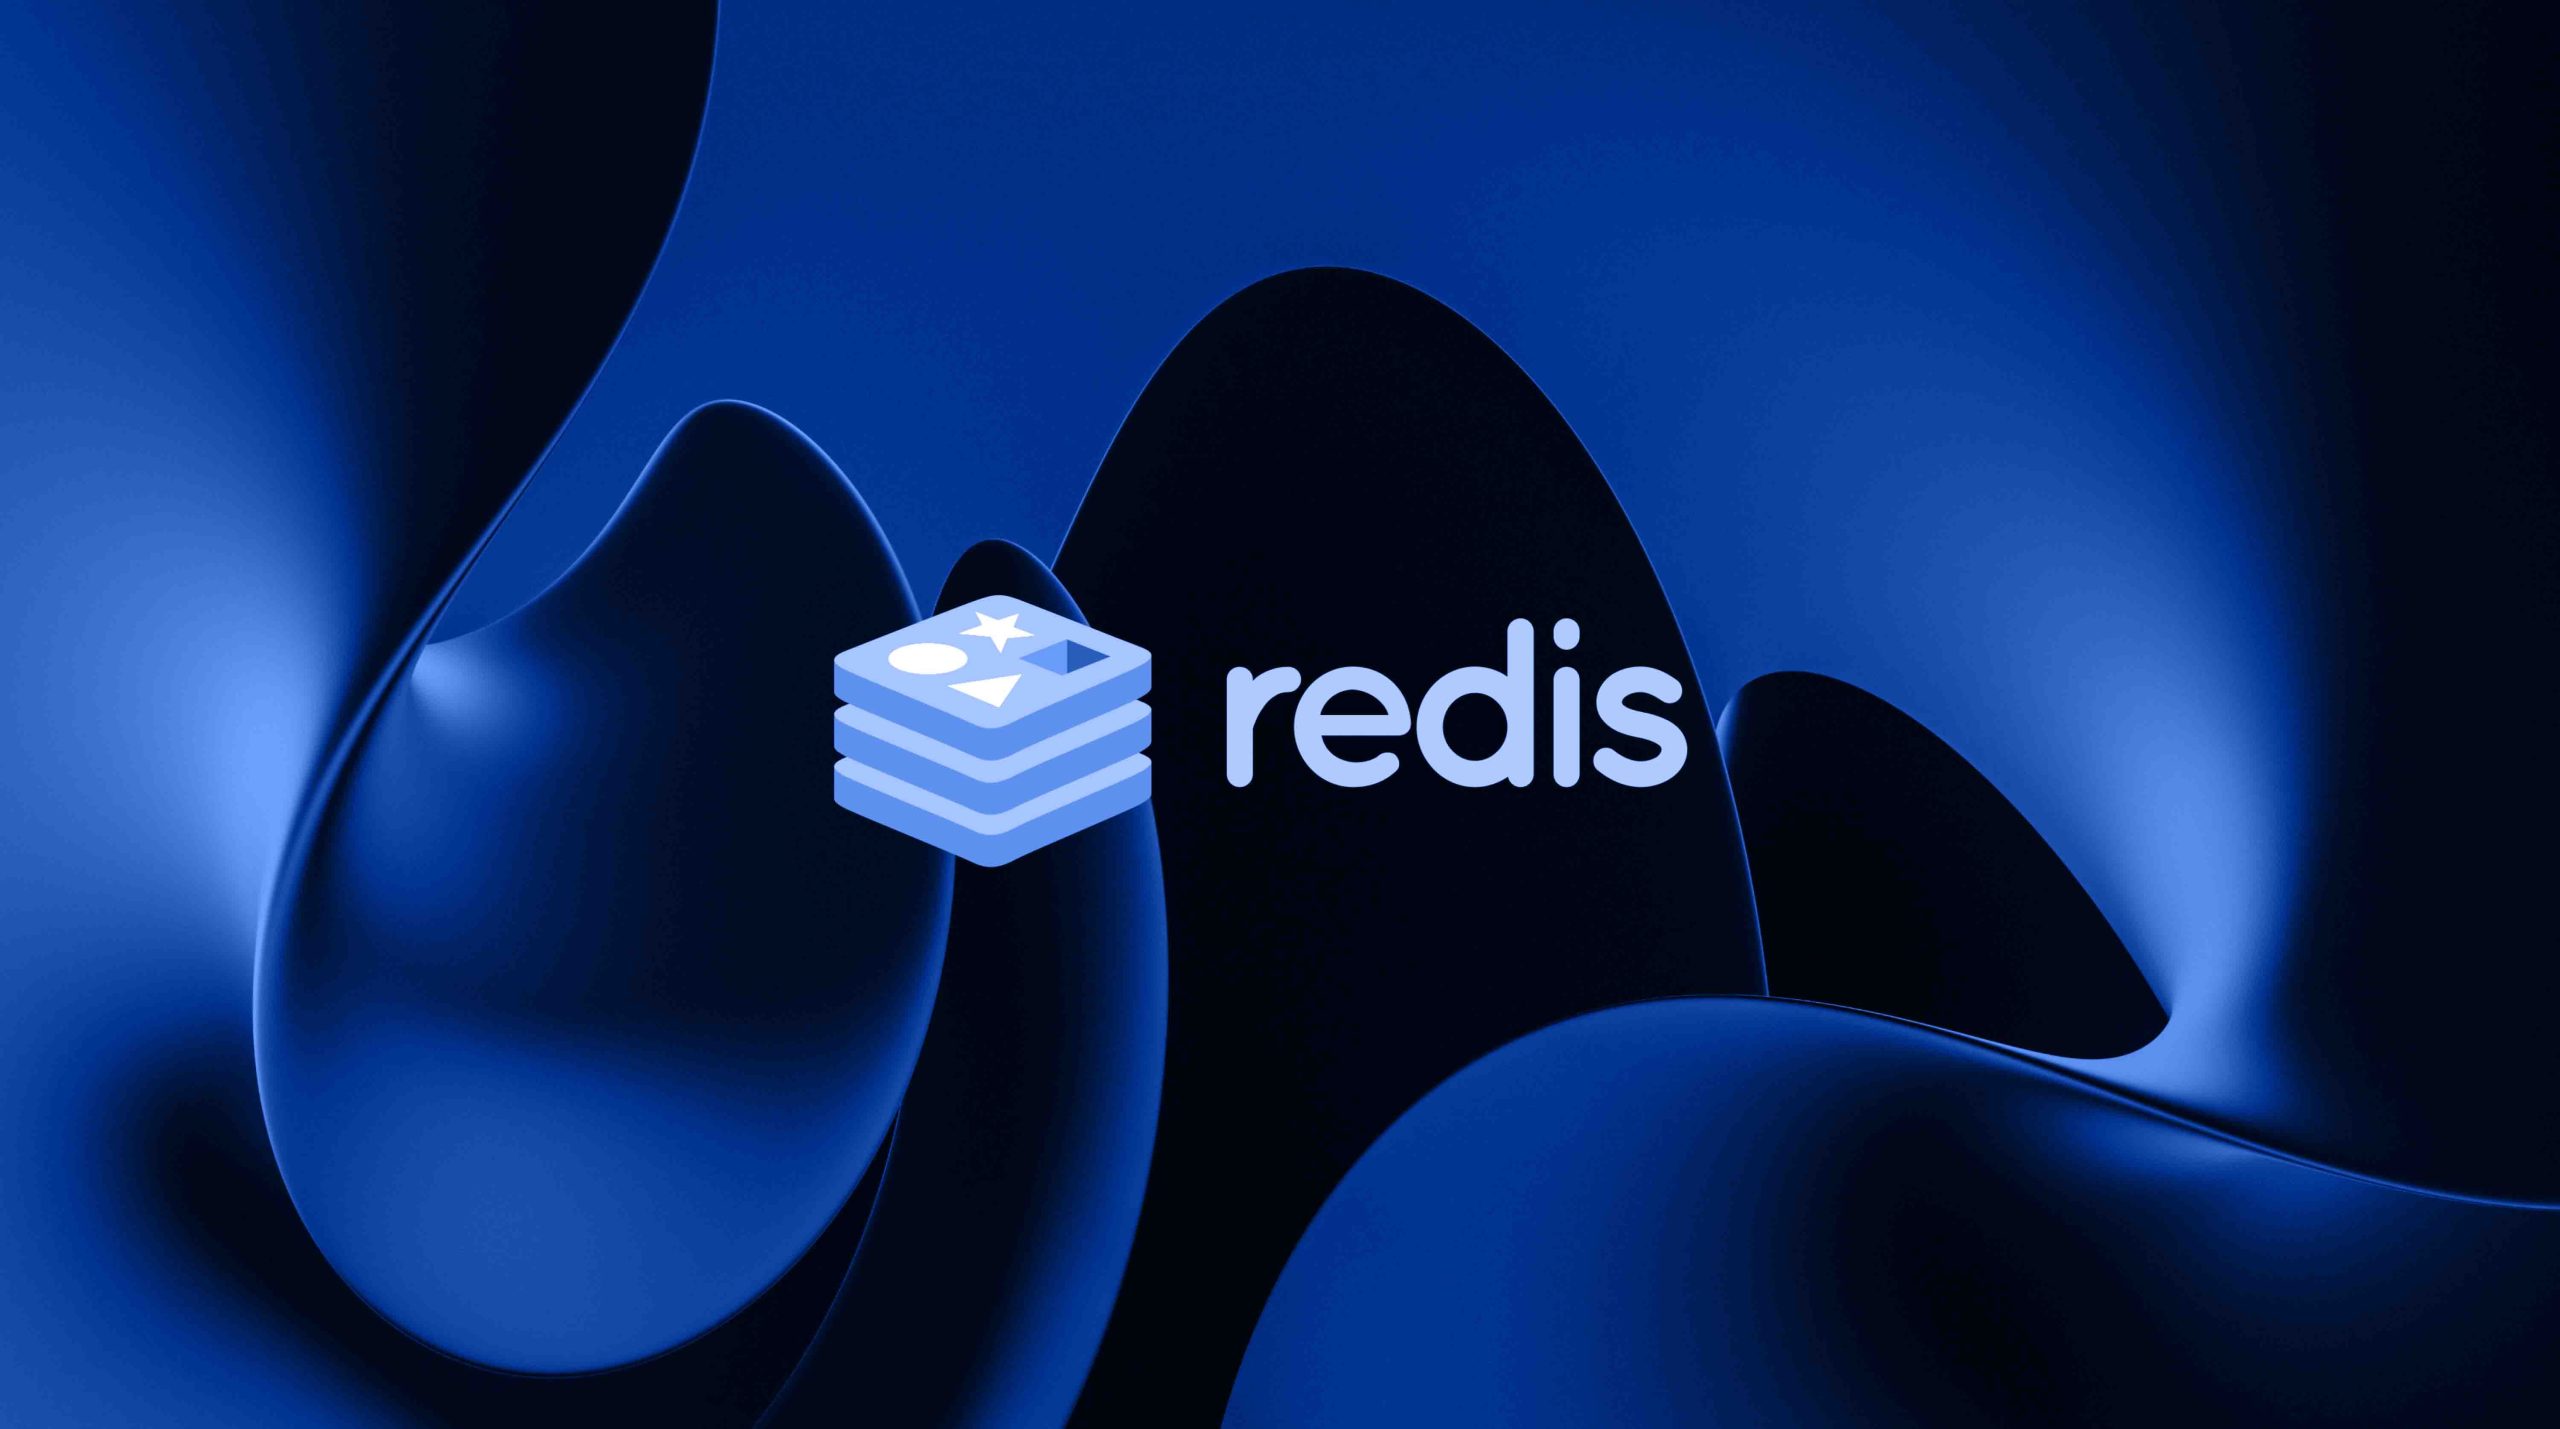 Discover the Many Benefits of the Redis Database